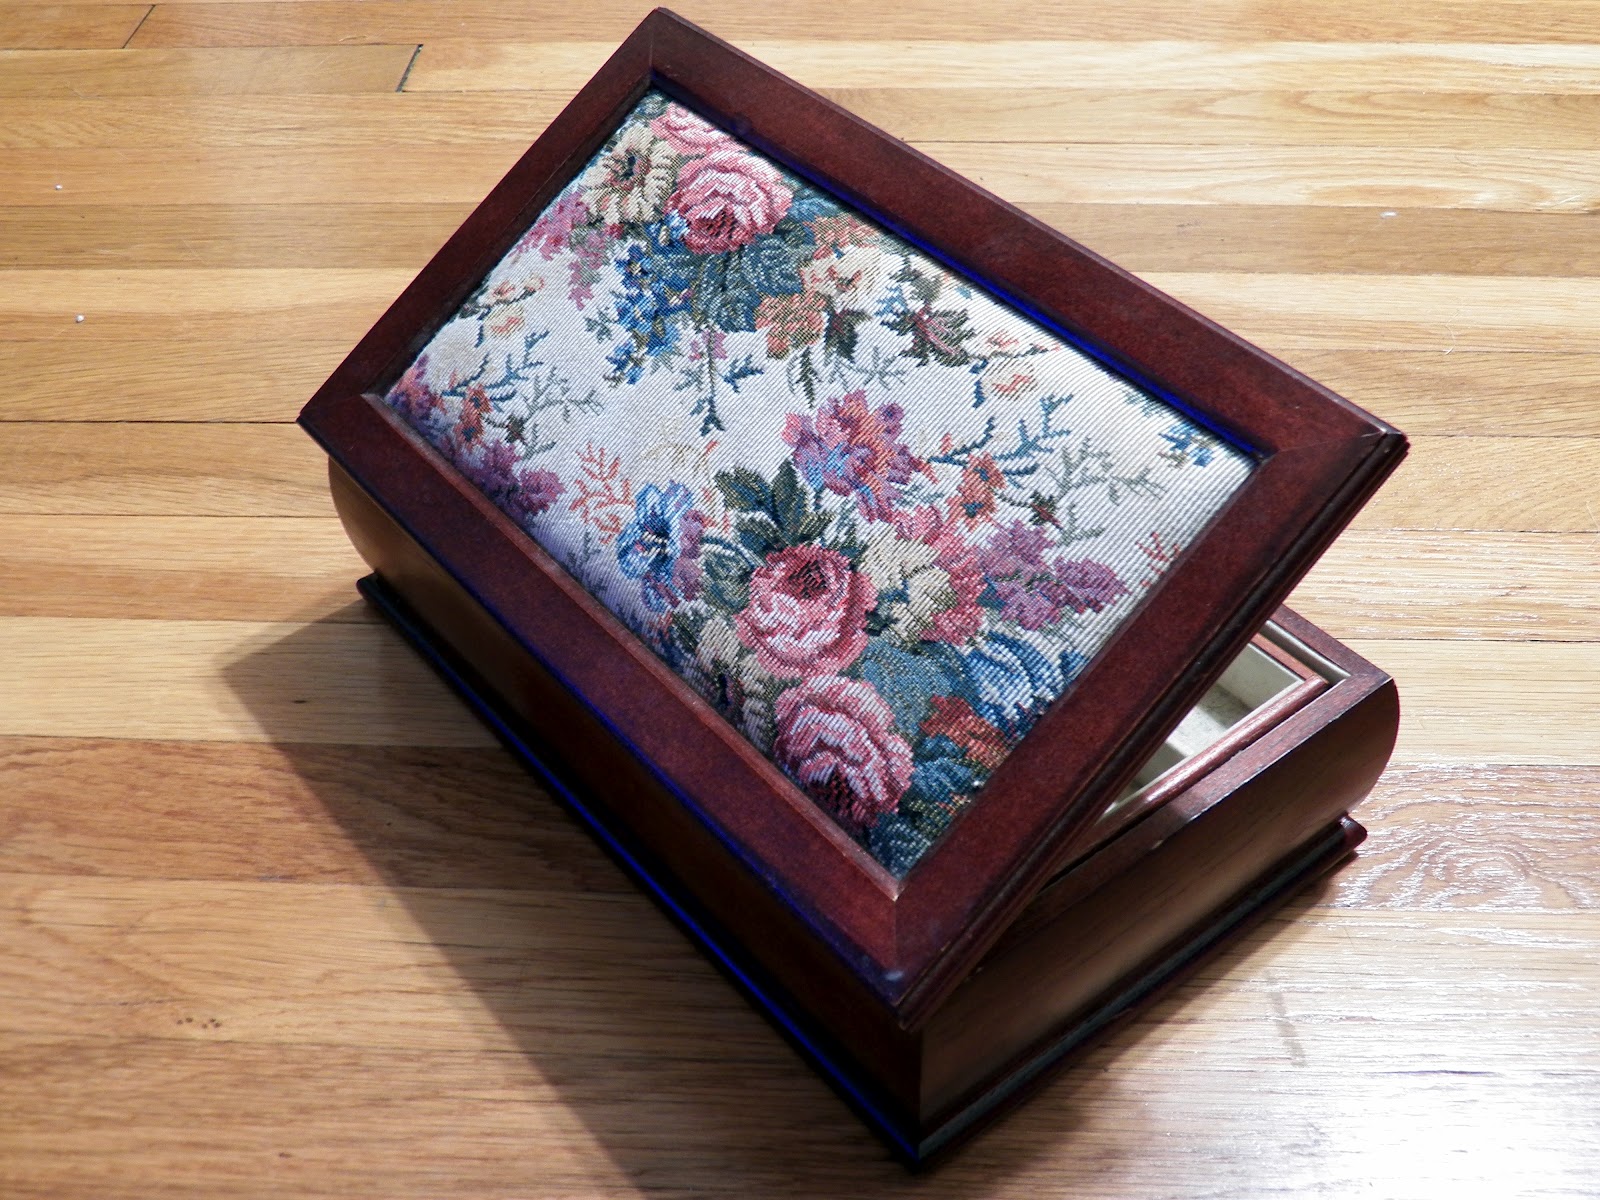 Less Bitching, More Stitching! - A Fiber Arts Blog: Tutorial - Framing Your  Cross Stitch Using Random Stuff (in This Case, a Jewelry Box Lid)